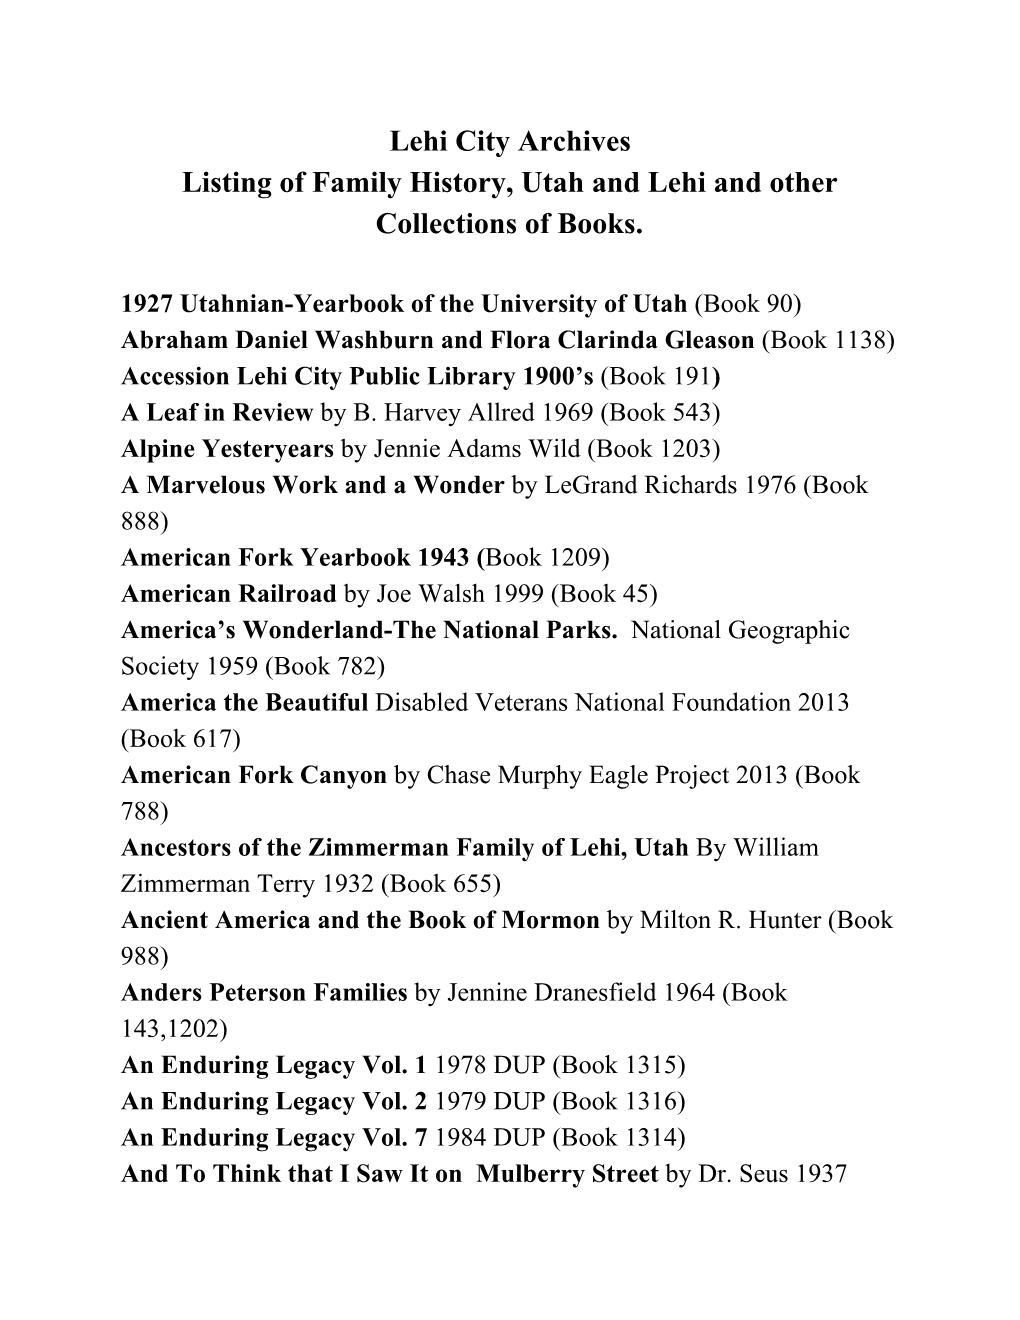 Lehi City Archives Listing of Family History, Utah and Lehi and Other Collections of Books